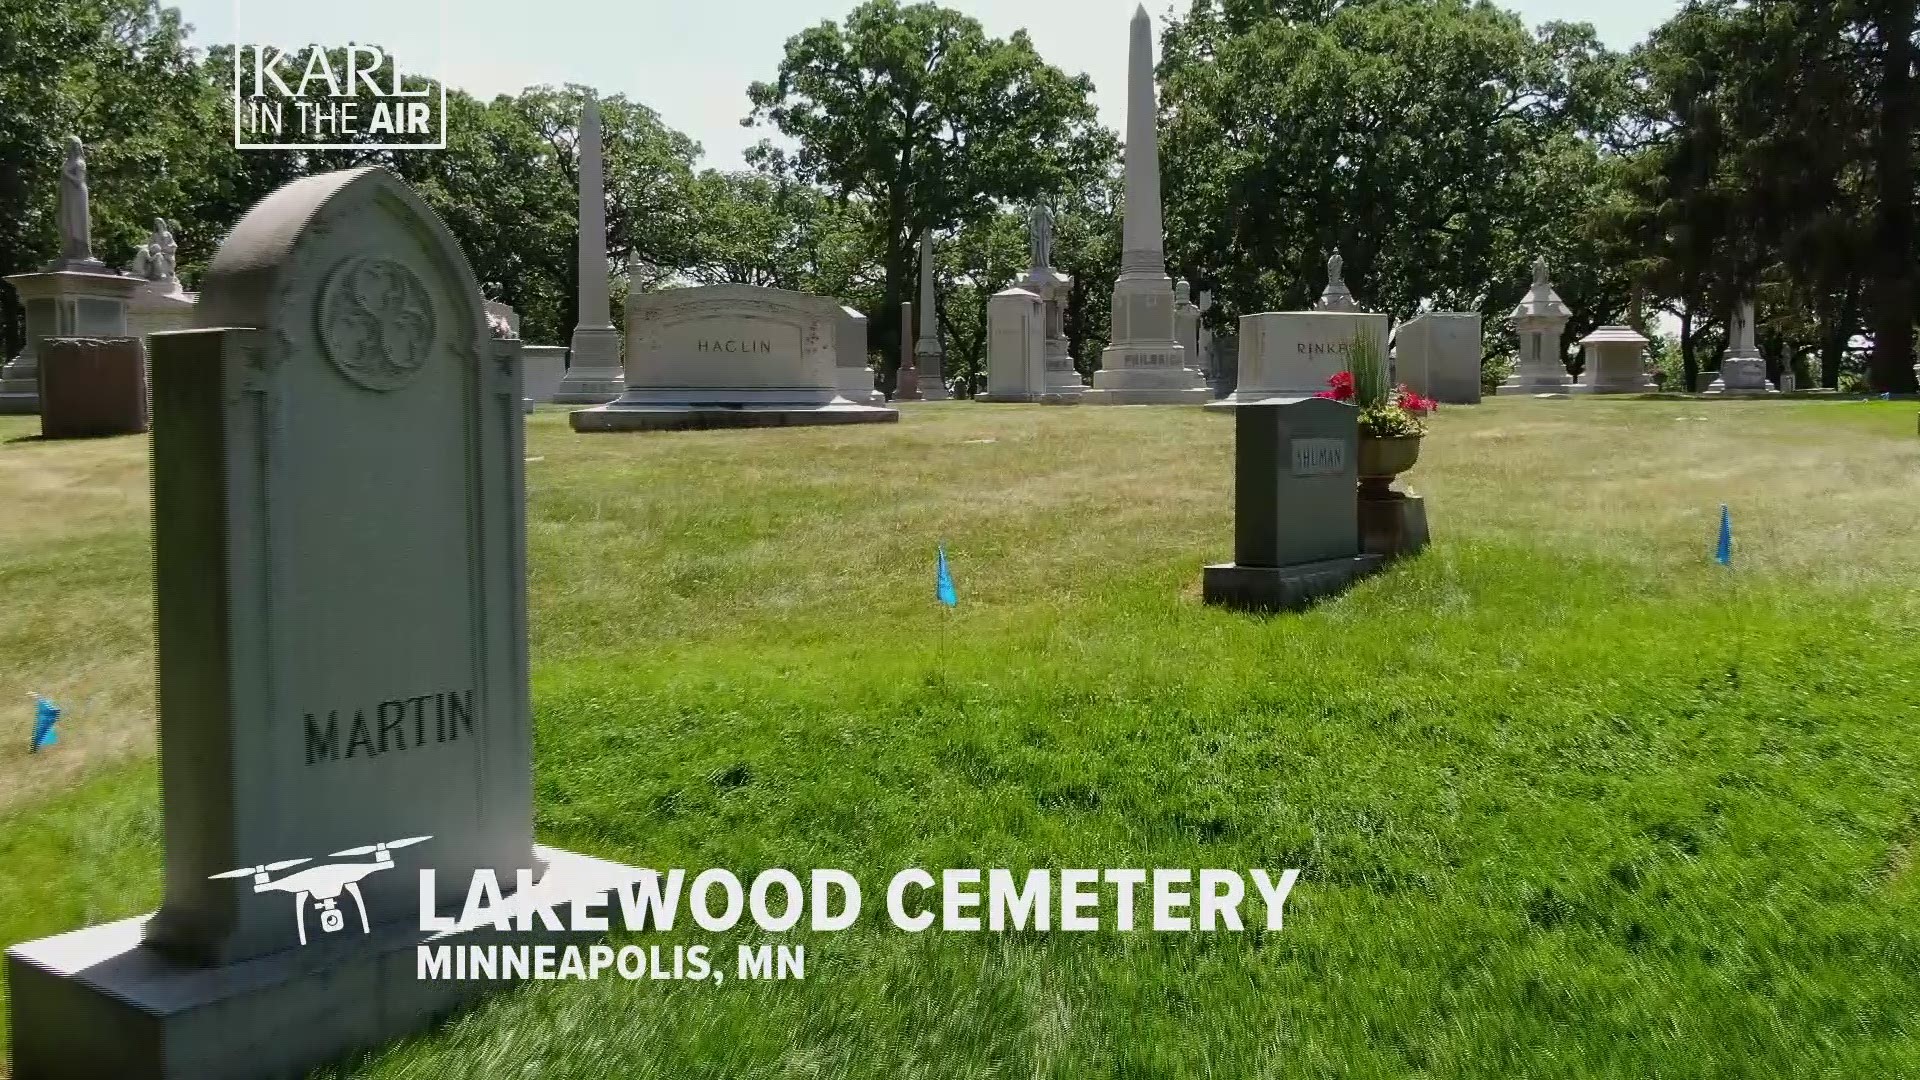 The latest edition of our summer drone series KARE in the Air takes us over Lakewood Cemetery in Minneapolis, home to some of Minnesota's most famous folks.